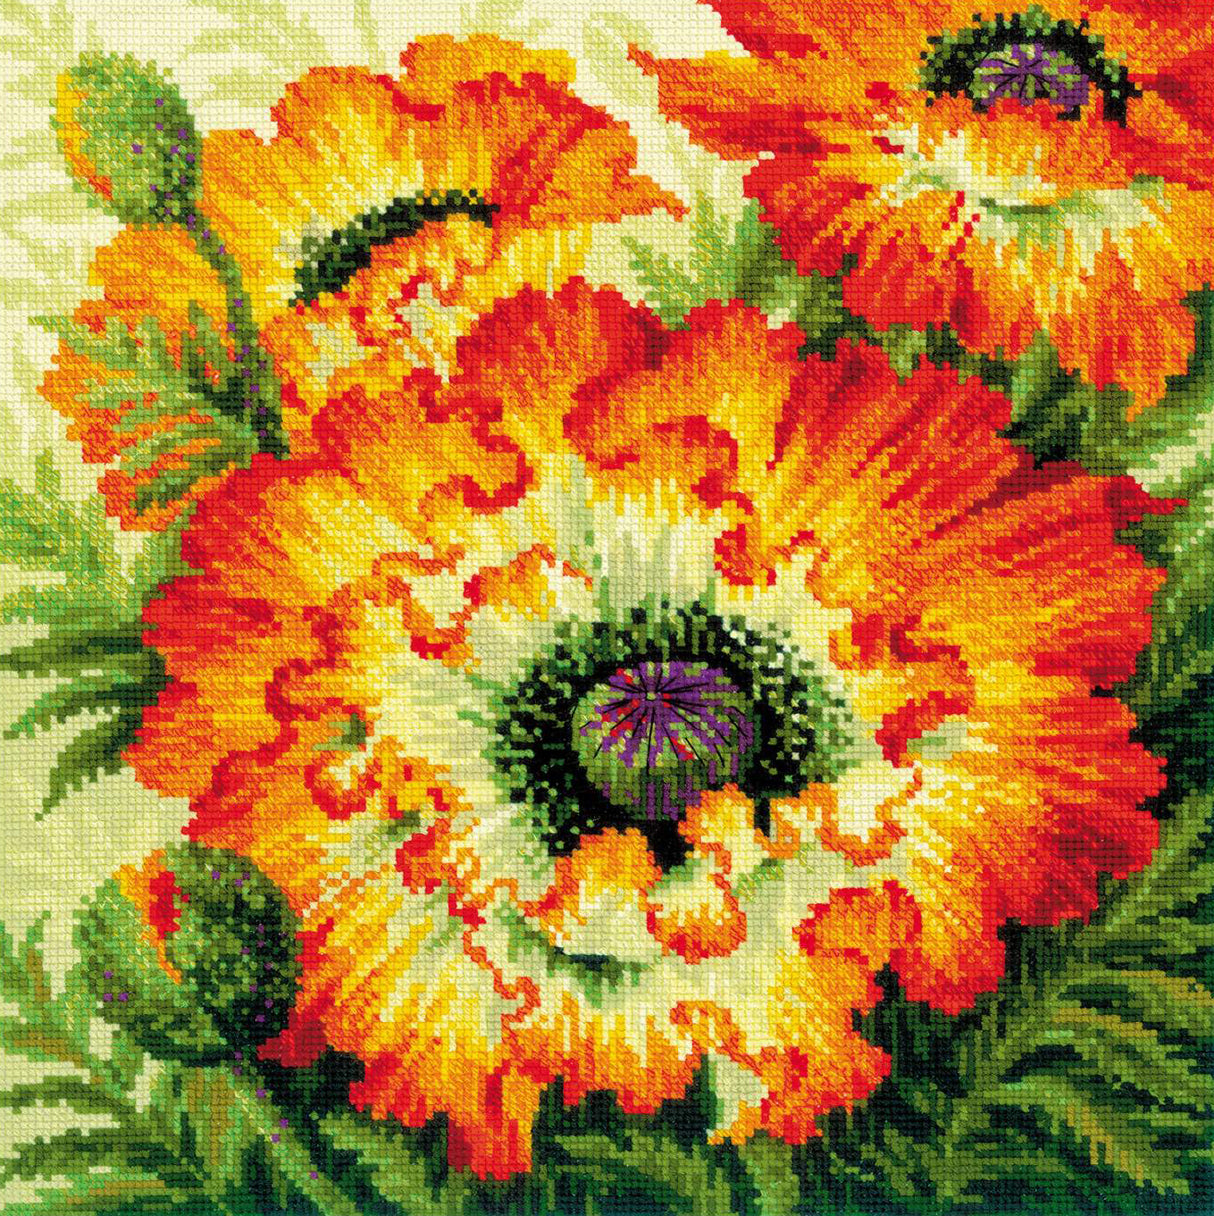 Cross Stitch Embroidery Kit - "Fire Poppies" - Riolis 2080